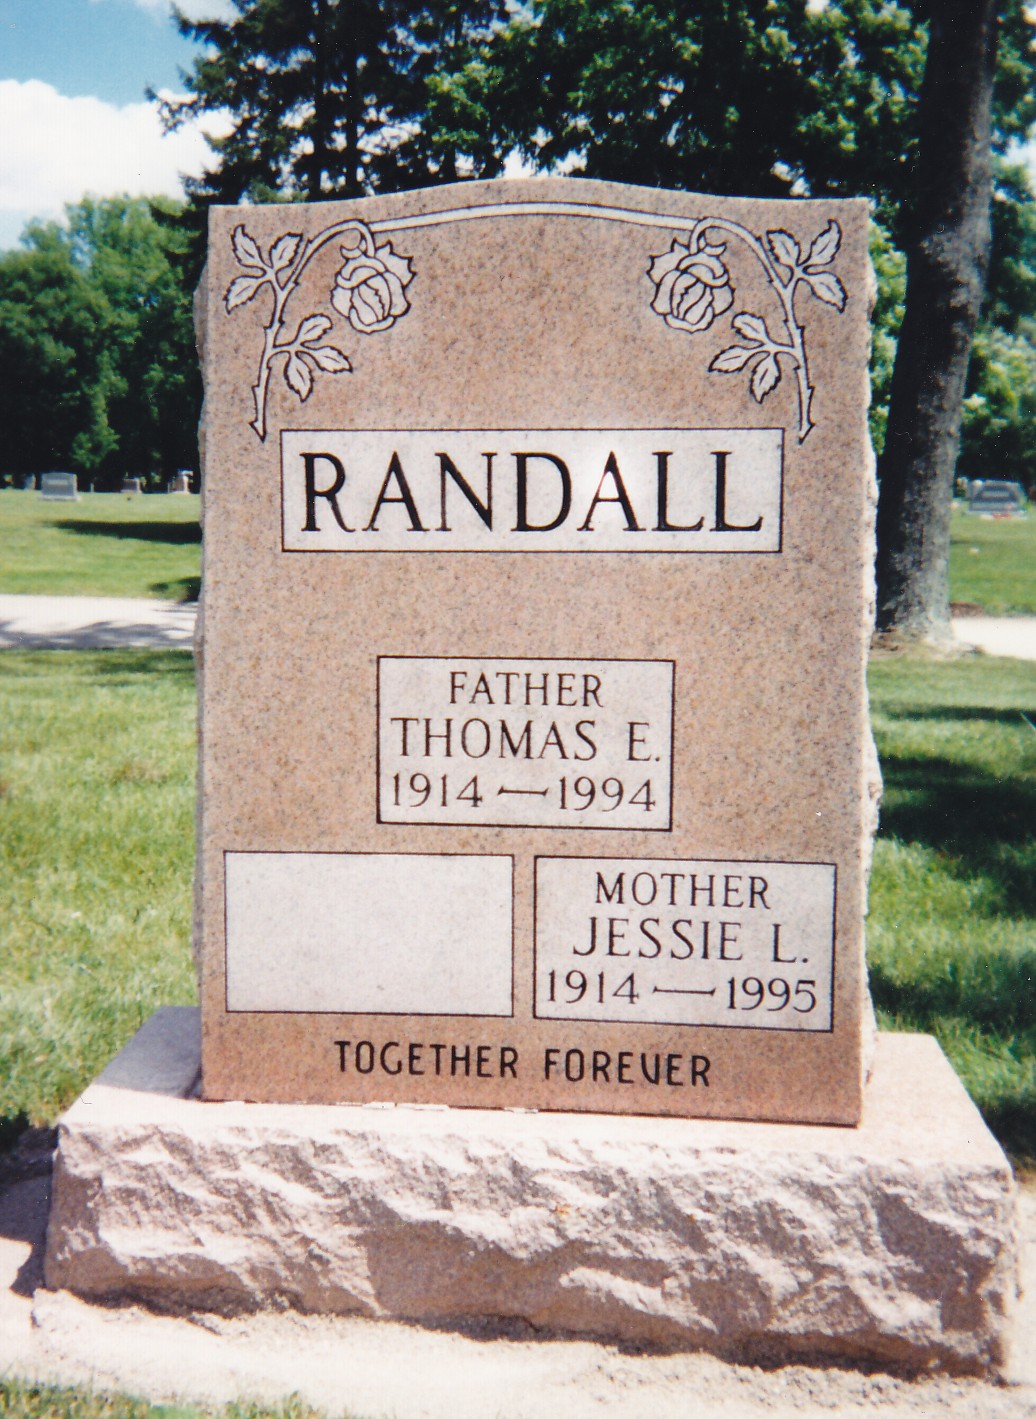 Tombstone for Thomas Edwin Randall (August 13, 1914 - Jan. 24, 1994) and his wife, Jesse L. Randall (1914 - 1995).